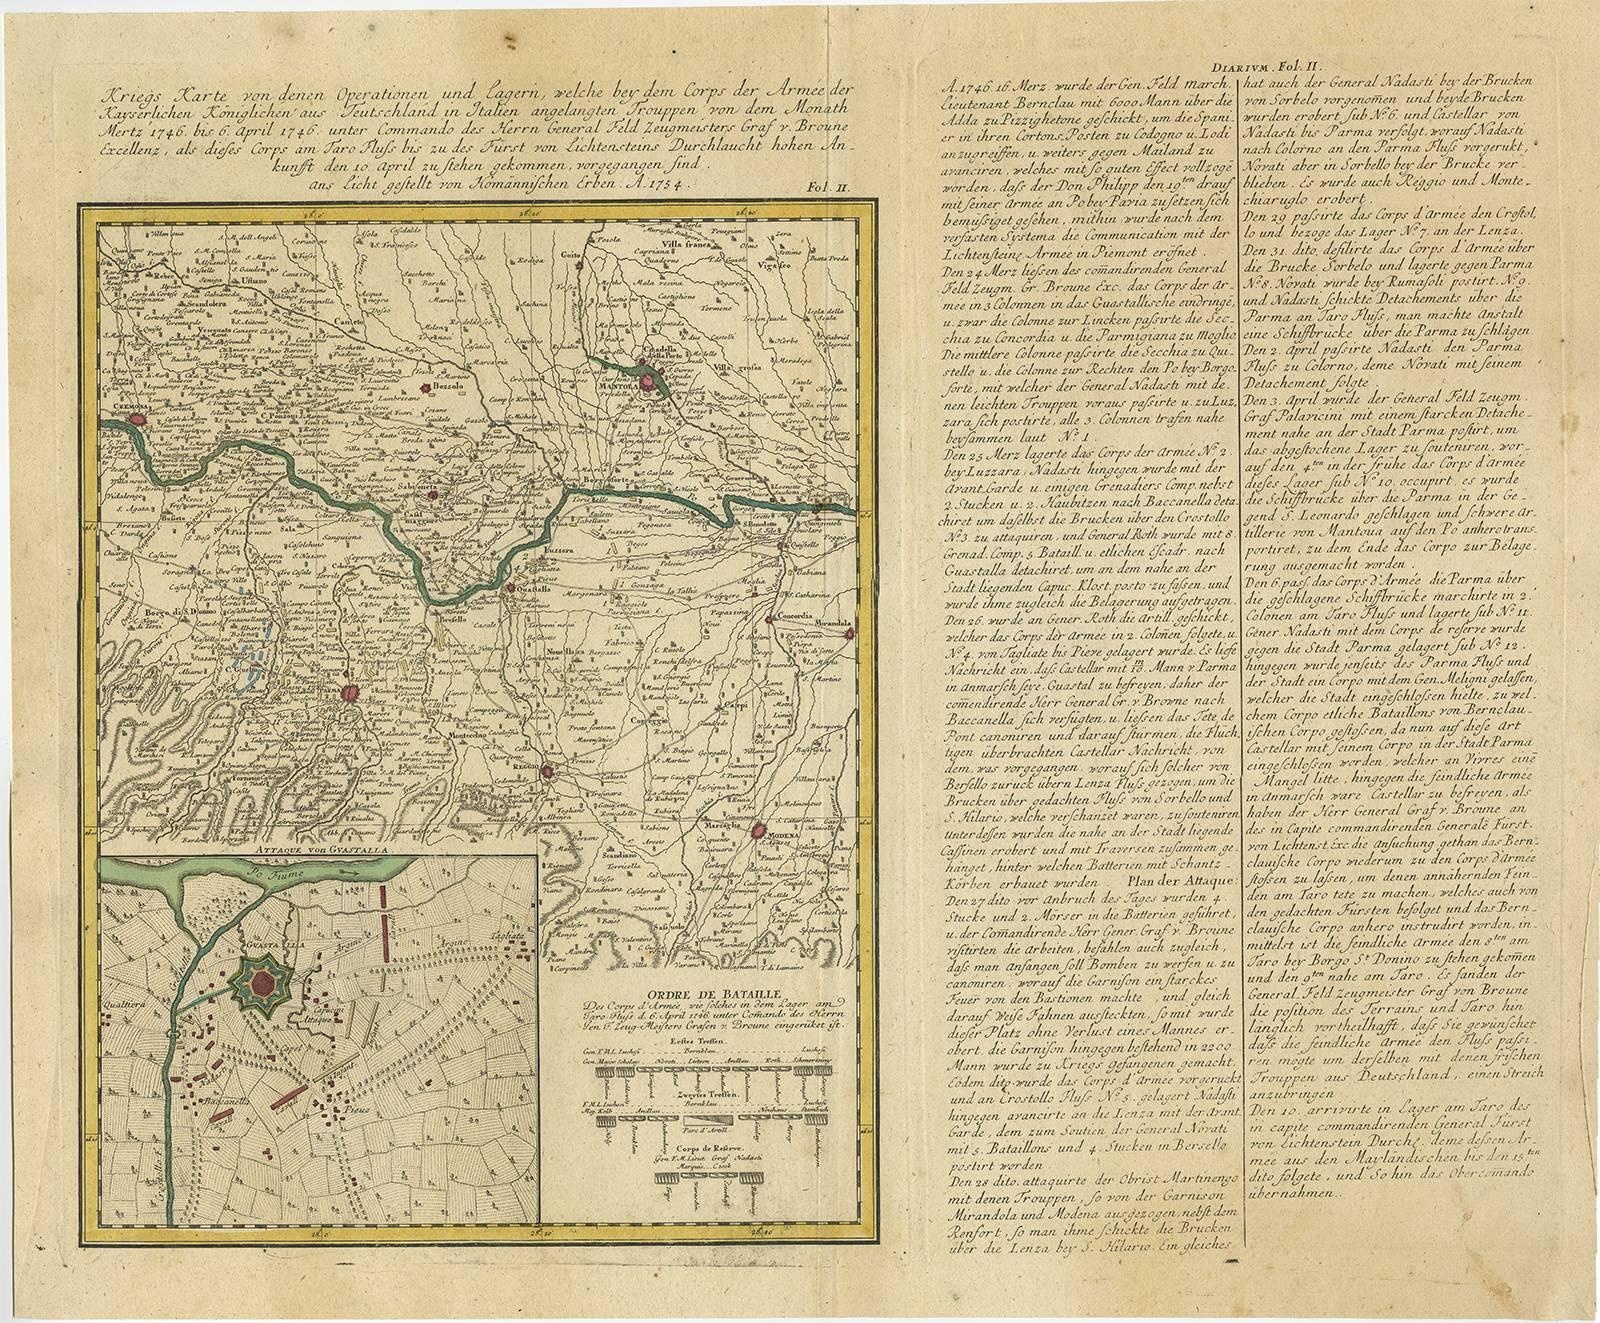 Set of two maps of northern Italy showing the position of troups during the war in April and March 1746. The area covered includes the course of the River Po between Valenza (north of Alexandria) and San Benedetto (south of Mantova) and the area